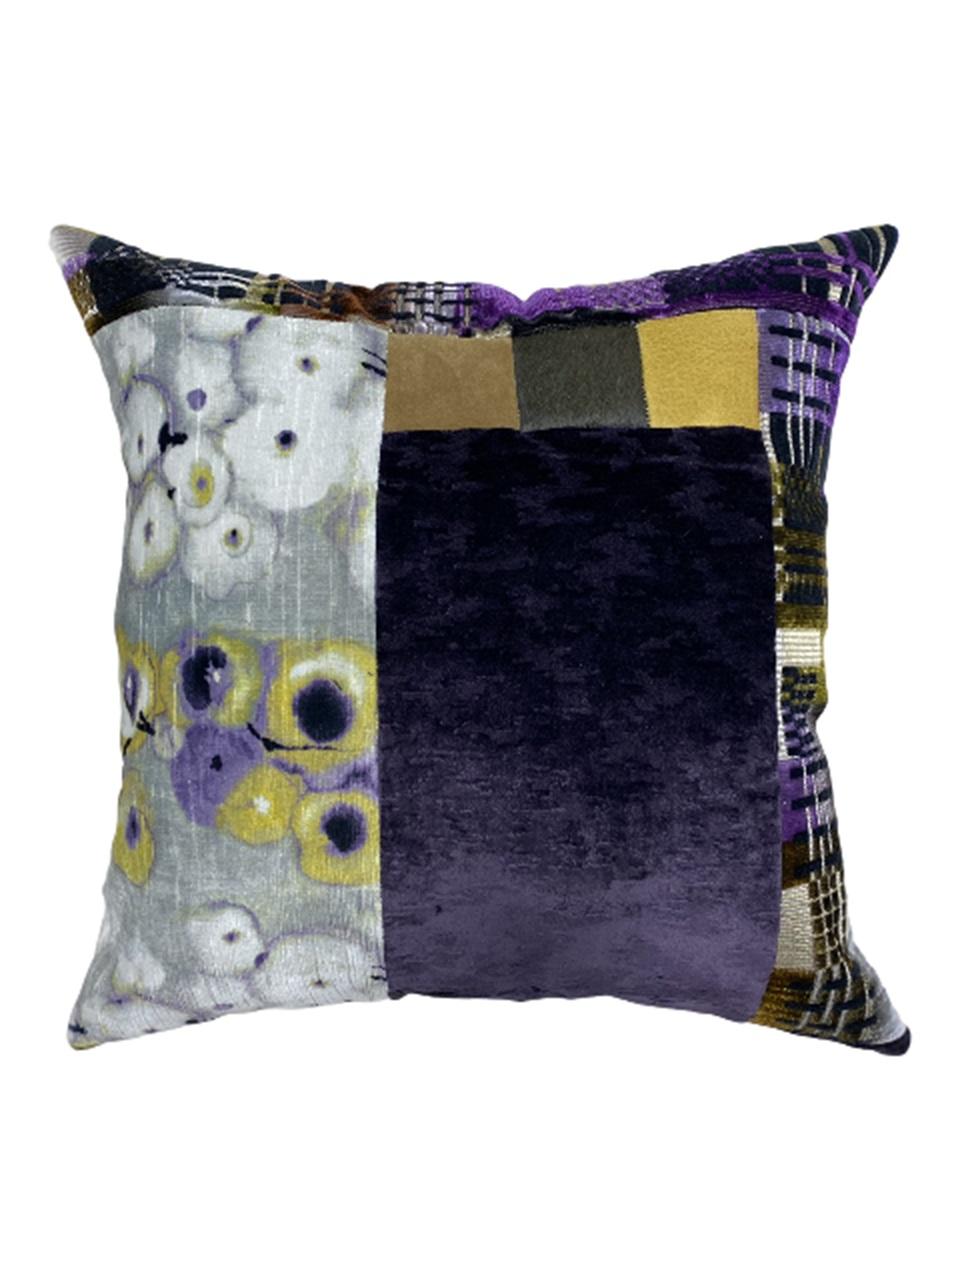 American Purple and Saffron Highlight Pillow For Sale